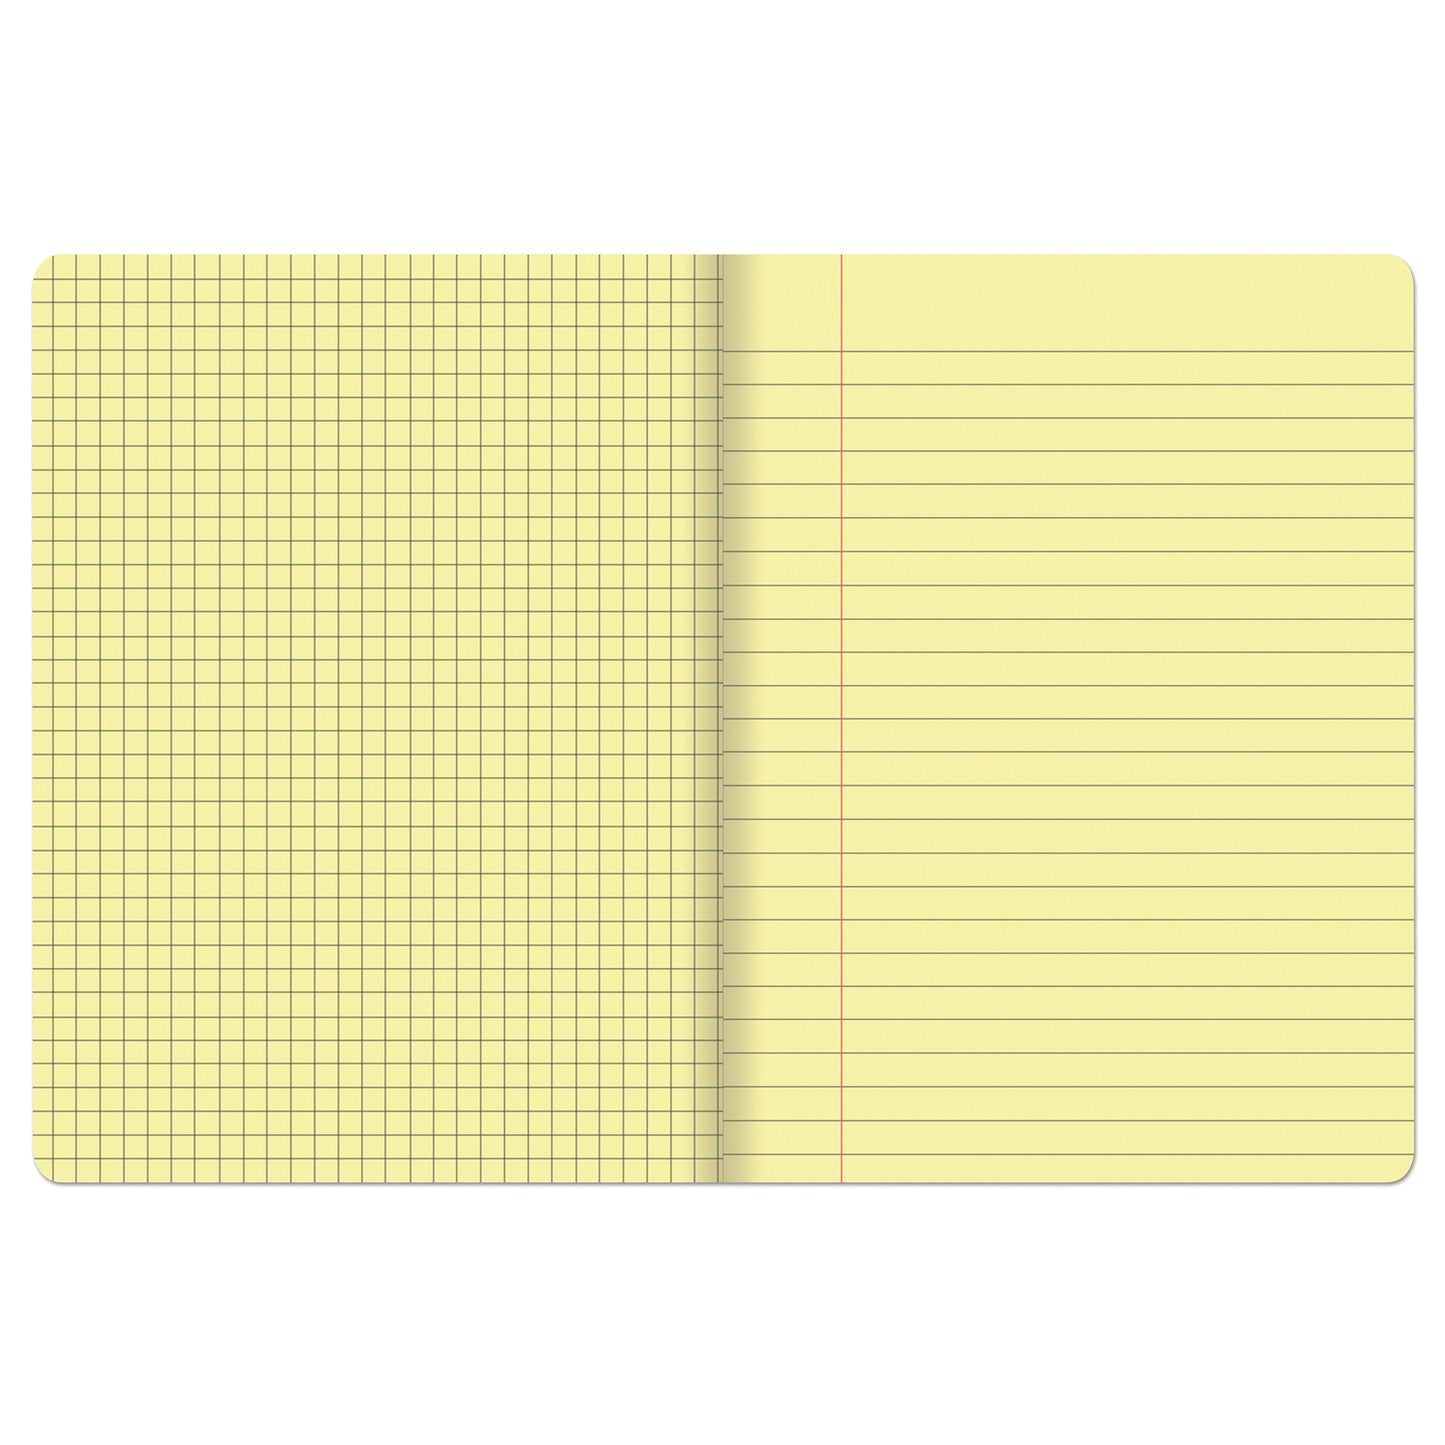 Dual Ruled Composition Book, Yellow, 1/4 in grid and 3/8 in (wide) 9-3/4" x 7-1/2", 100 Sheets, Pack of 6